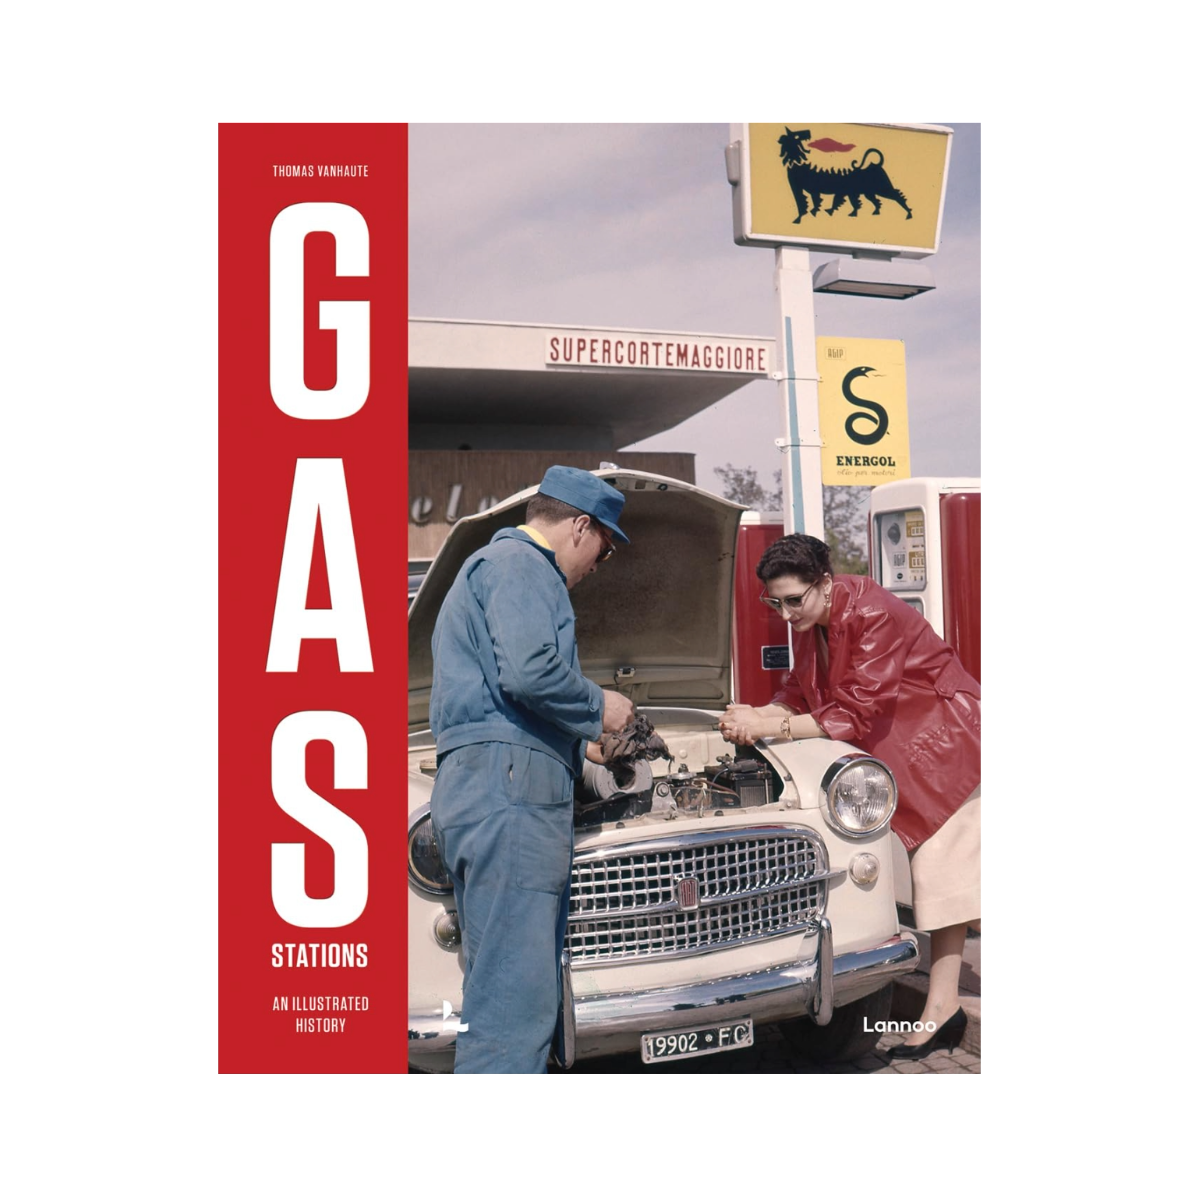 Gas Stations: An Illustrated History by Thomas Vanhaute